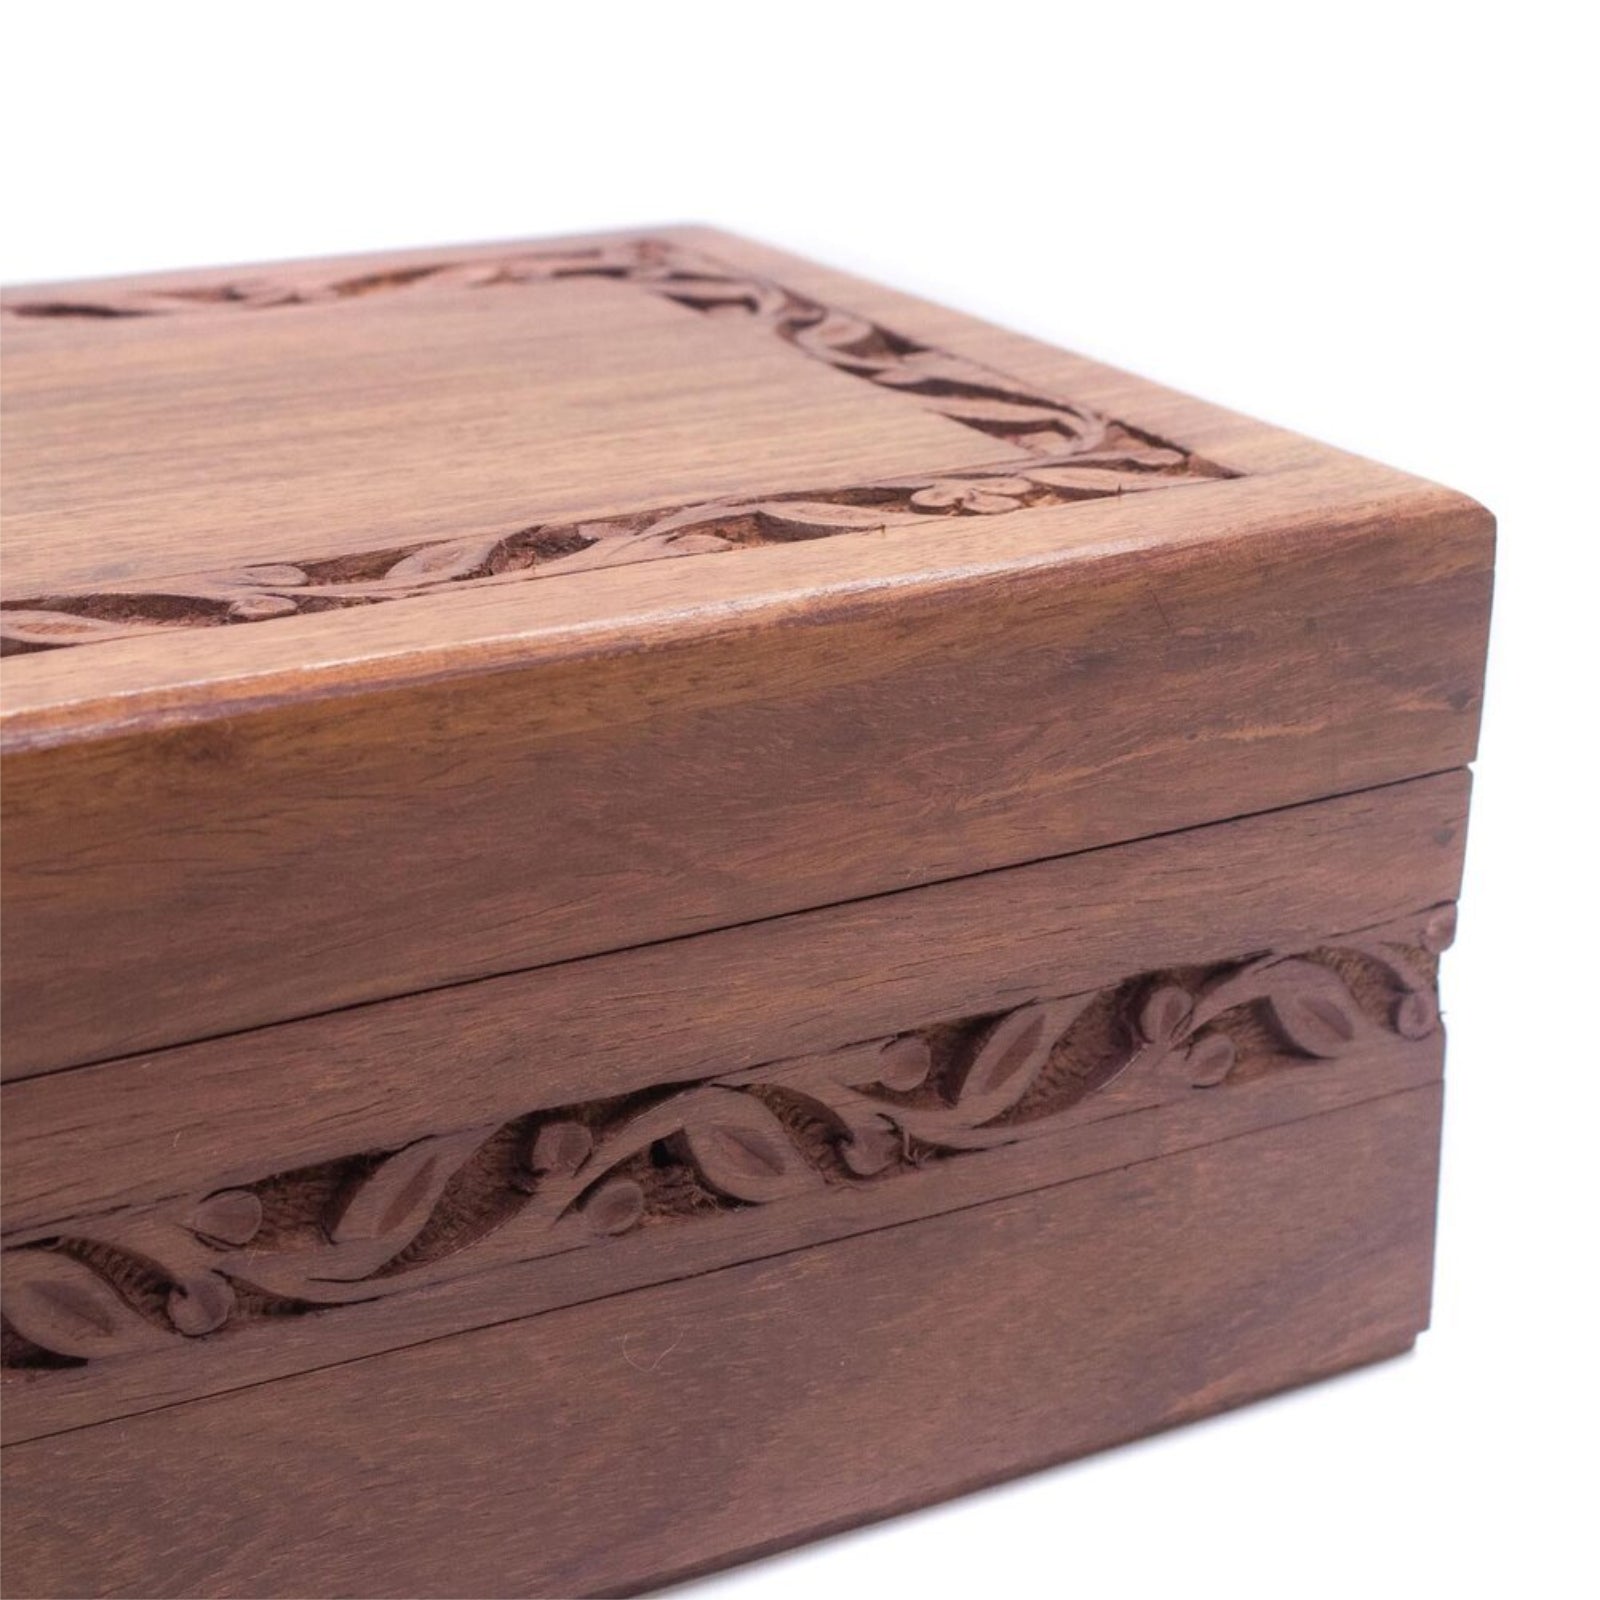 Carved Box - Level 5 - Jean Claude Constantin